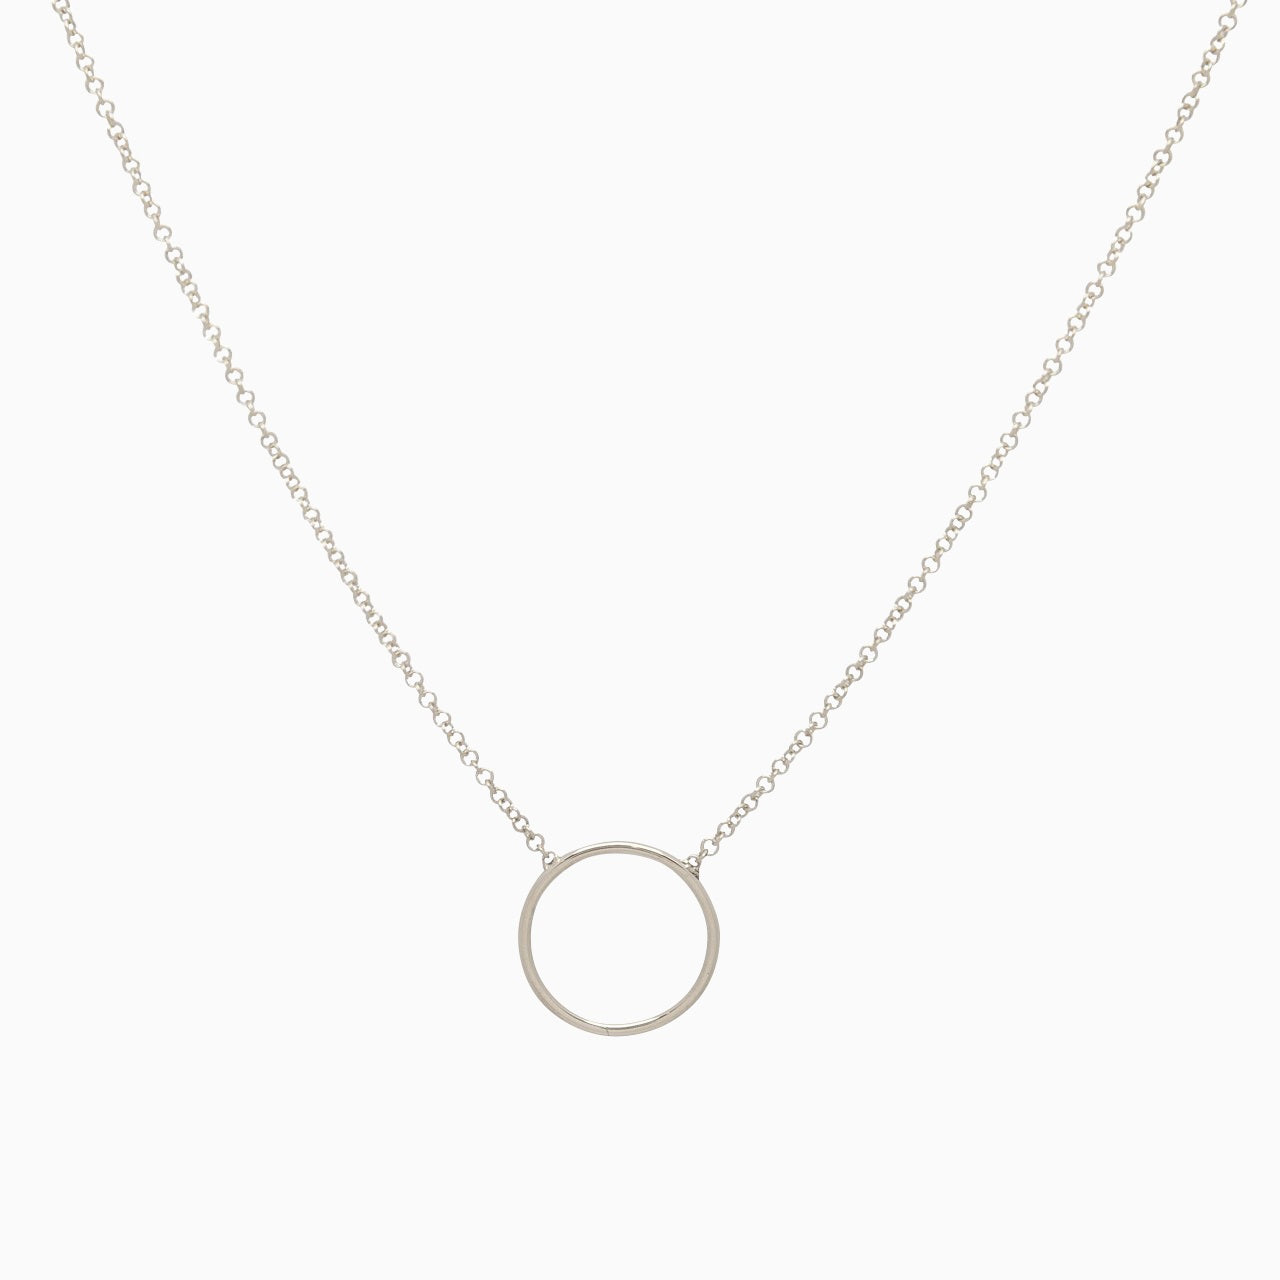 14k White Gold Round Open Ring Necklace